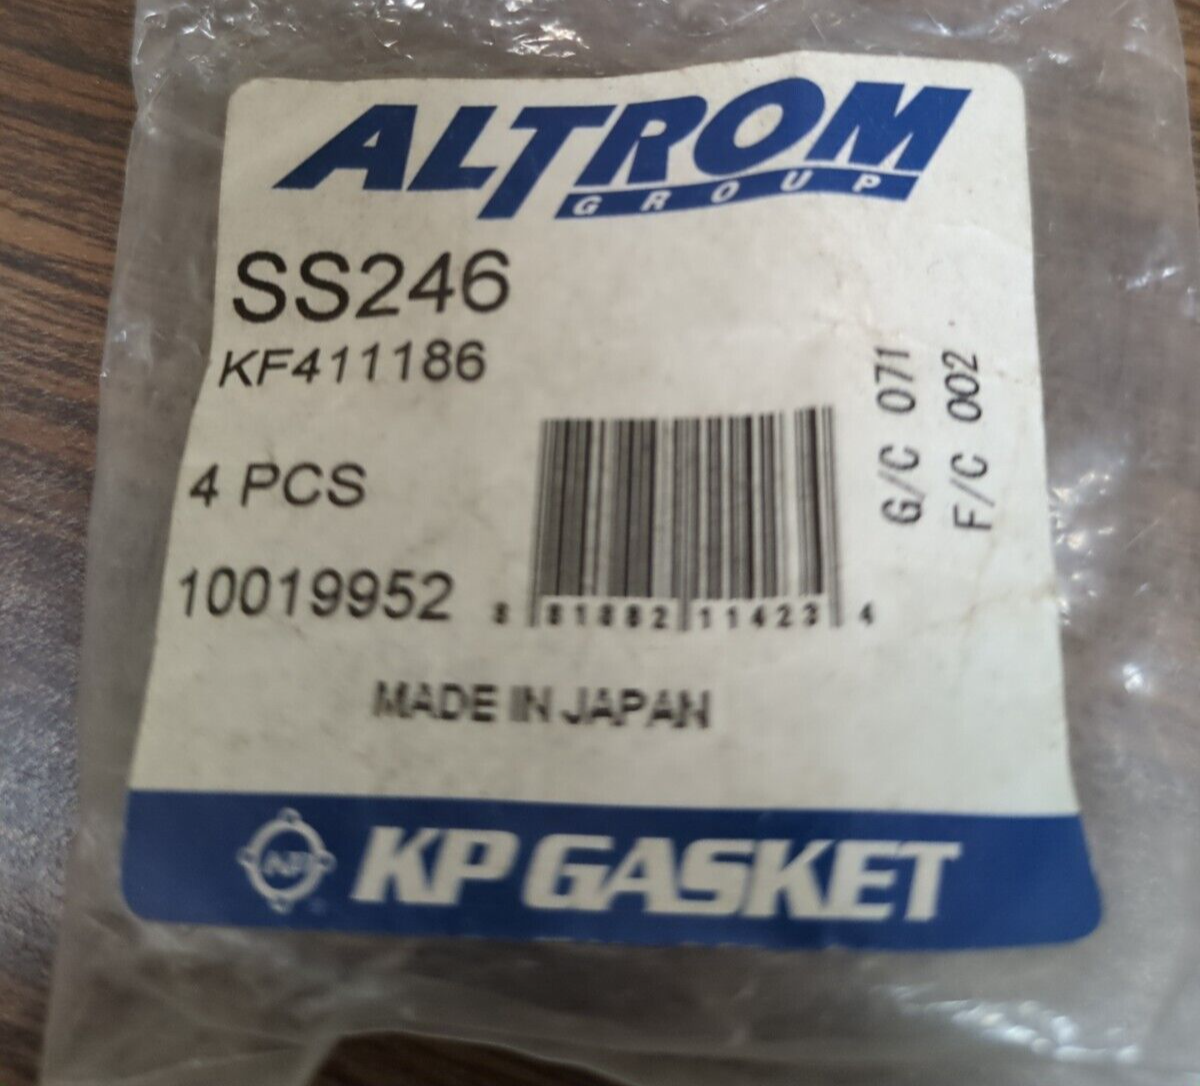 Primary image for Altrom KP Gasket SS246